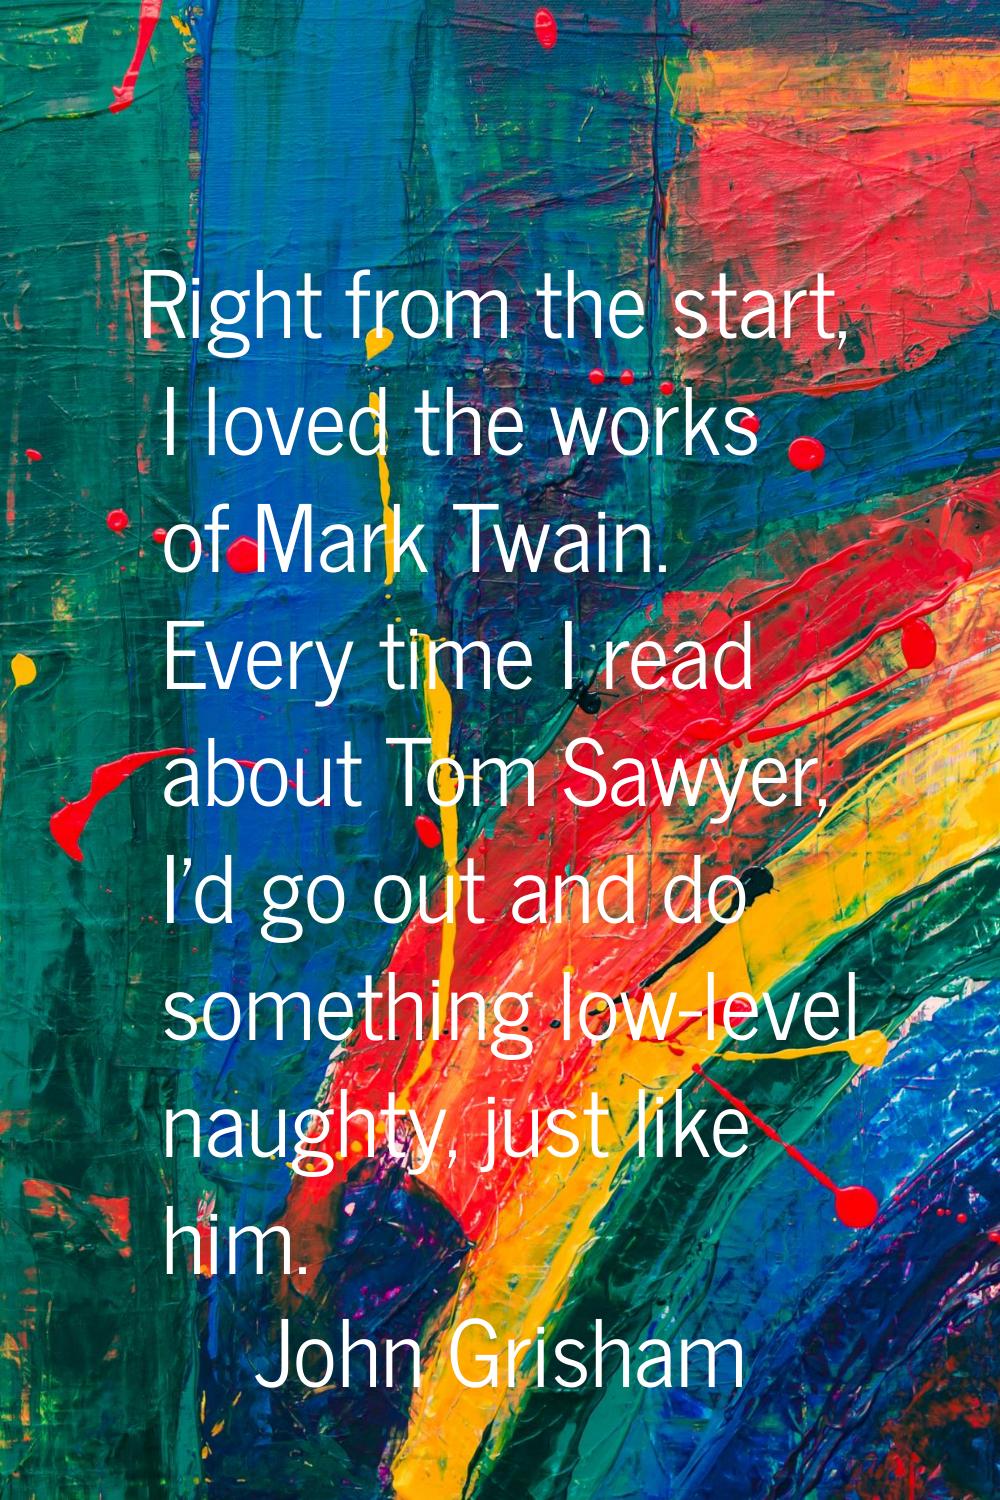 Right from the start, I loved the works of Mark Twain. Every time I read about Tom Sawyer, I'd go o